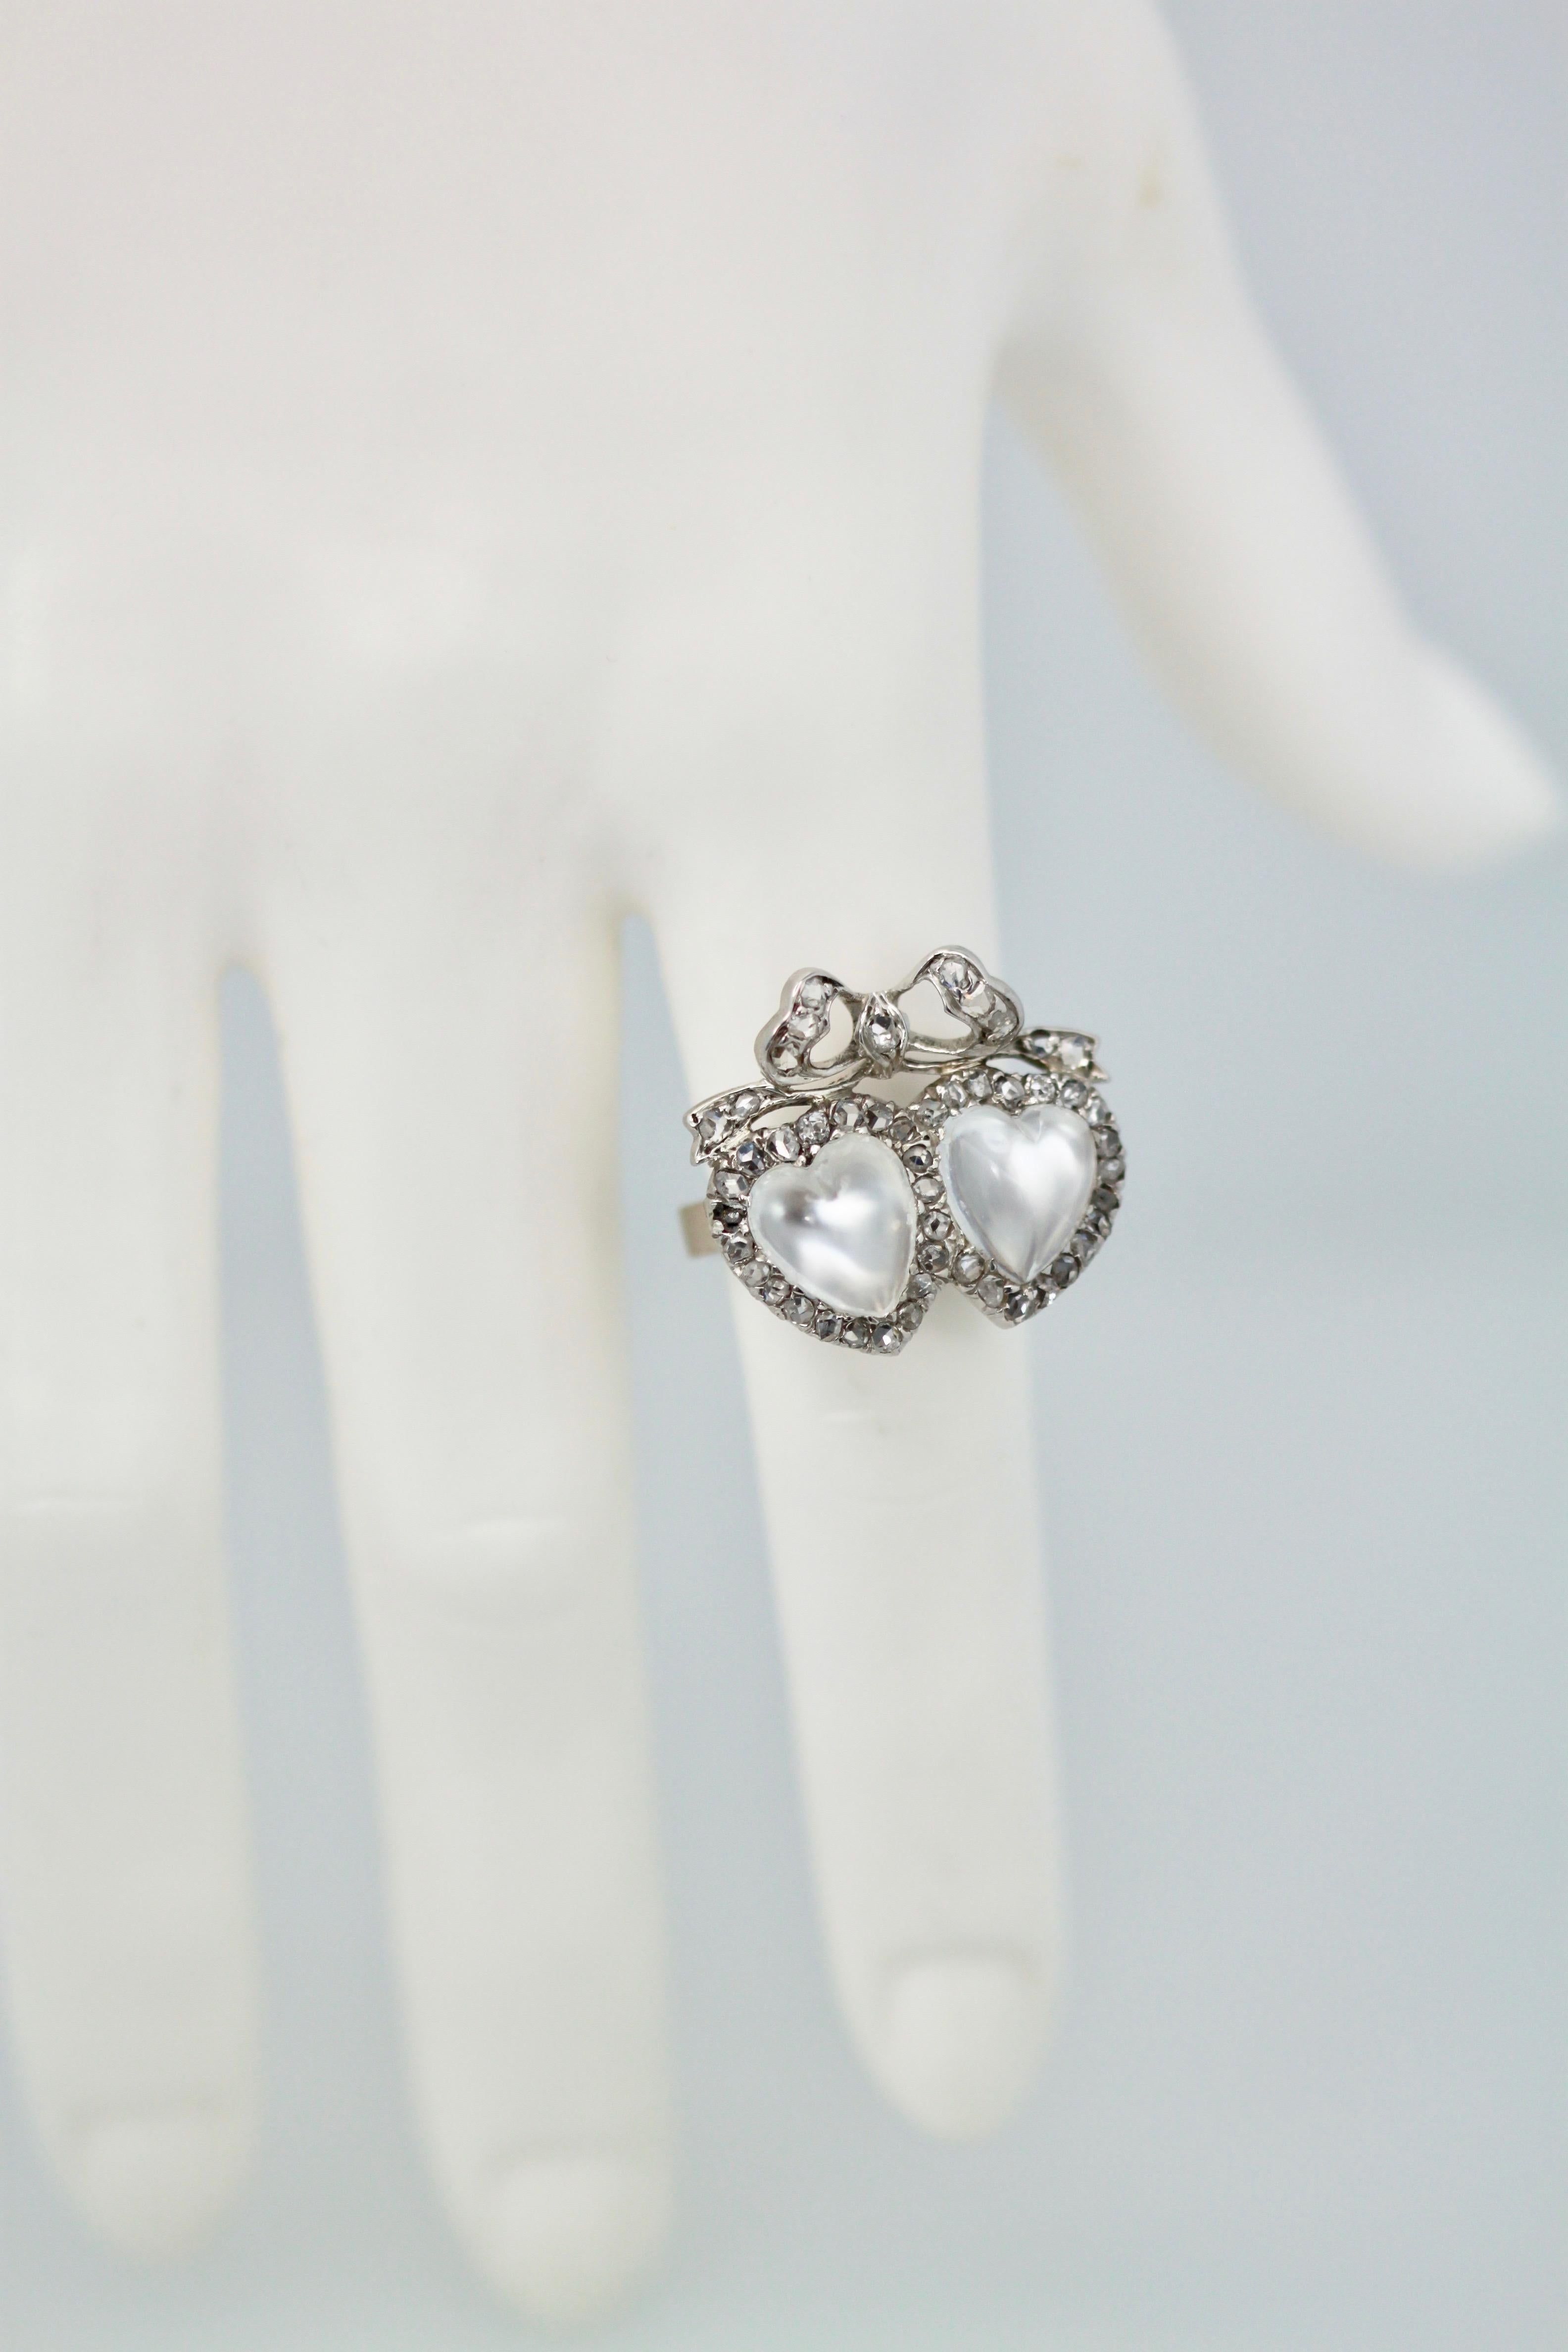 Round Cut Victorian Edwardian Double Heart Moonstone Sweetheart Ring